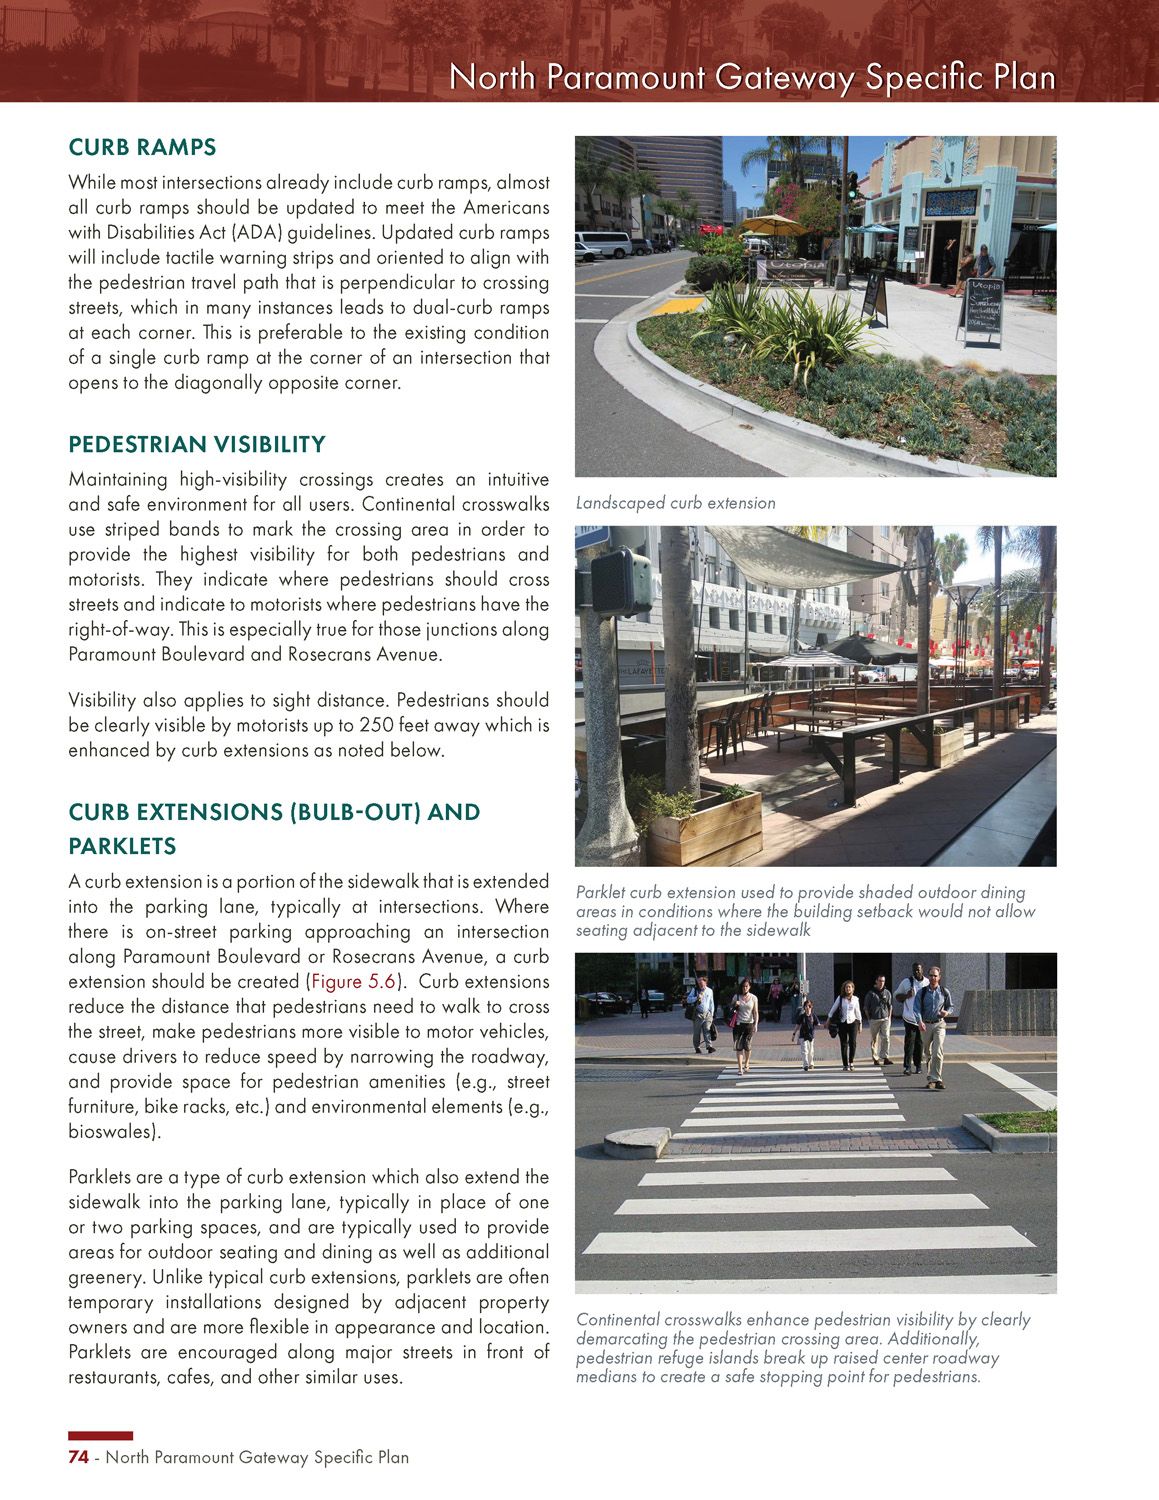 Recommended street amenities and precedent imagery